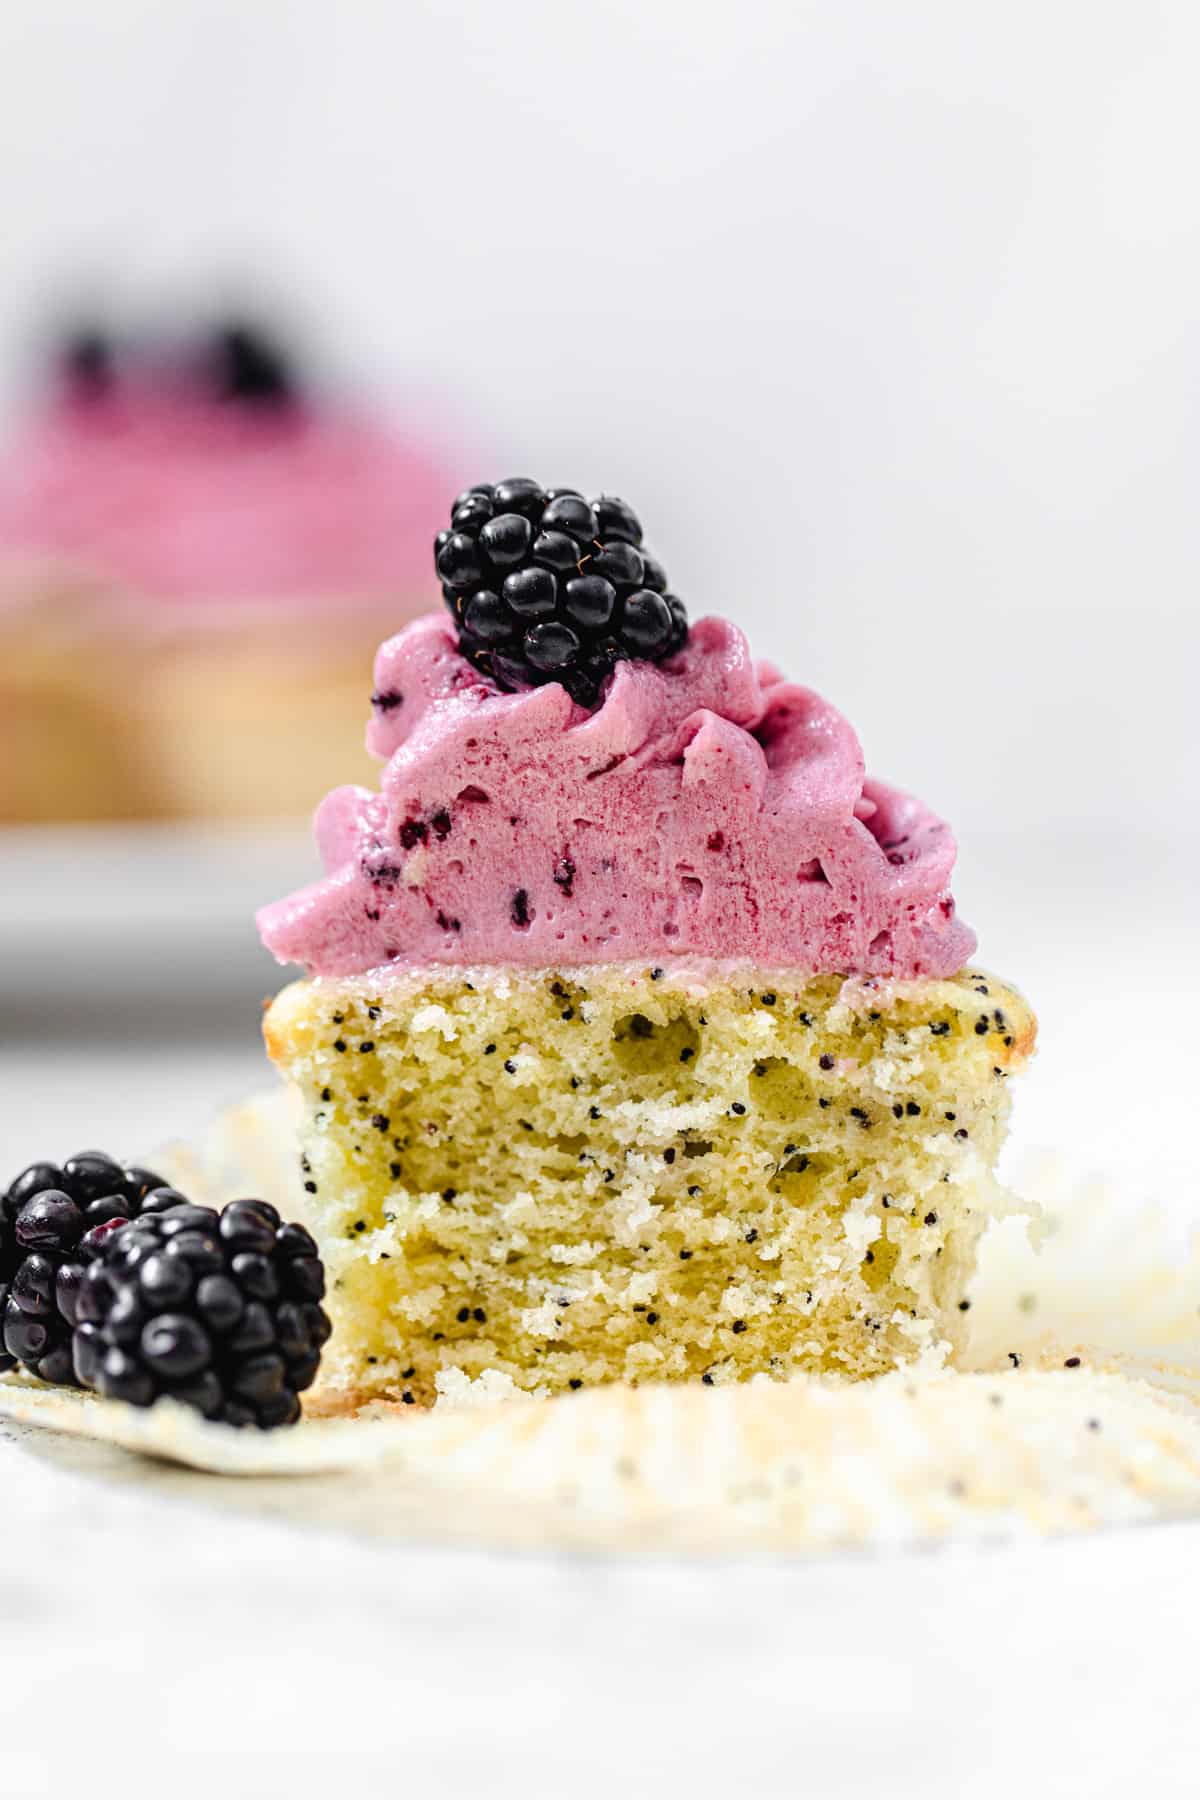 halved cupcake standing up on a cupcake wrapper with blackberries on it